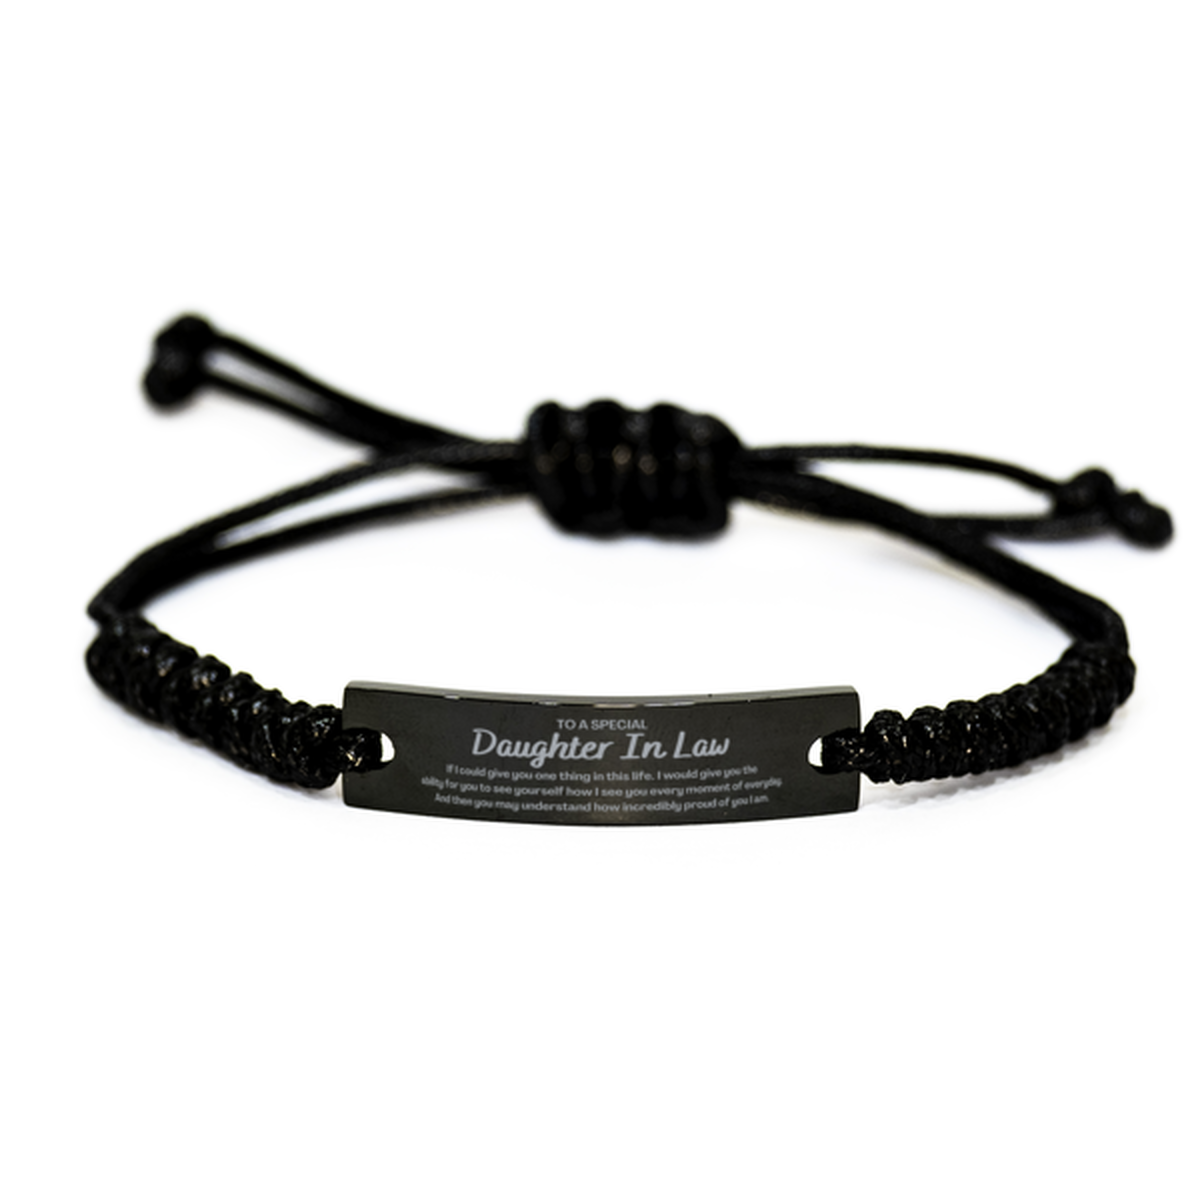 To My Daughter In Law Black Rope Bracelet, Gifts For Daughter In Law Engraved, Inspirational Gifts for Christmas Birthday, Epic Gifts for Daughter In Law To A Special Daughter In Law how incredibly proud of you I am